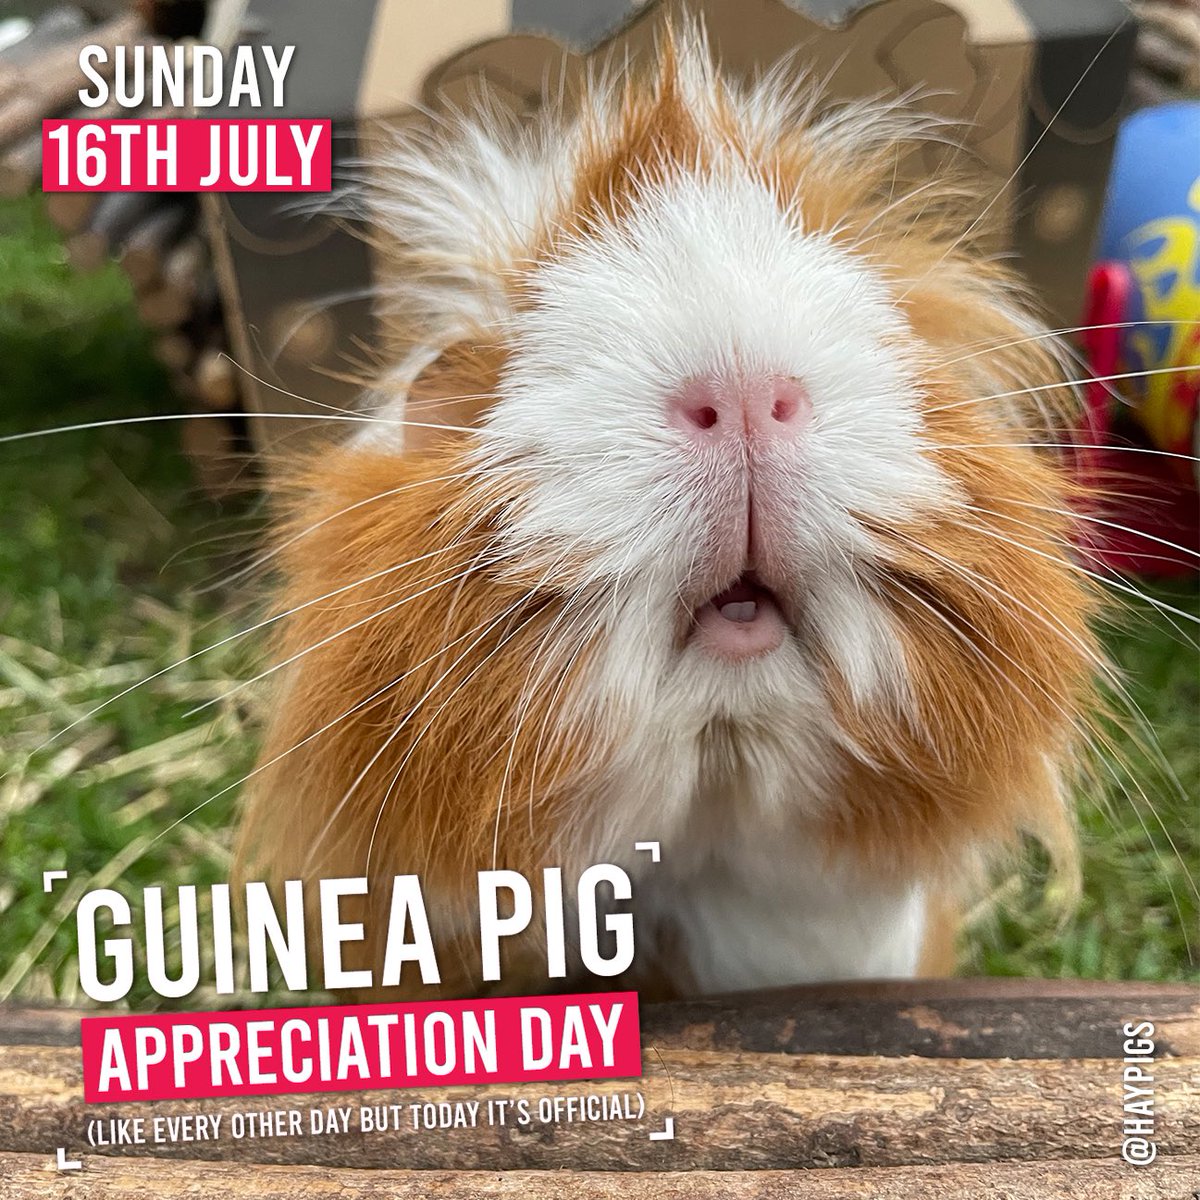 It’s #GuineaPigAppreciationDay 🐹❤️ What’s your favourite Guinea pig feature? 🤔 Is it their boop-able snoot? 🐽Their doughnut lips? 🍩 Their cheeky chops? ☺️ Or their peachy butts?! 🍑 #cutenessoverload #boopthesnoot #cheekychops #doughnutlips #floofs #haypigs #gpad2023